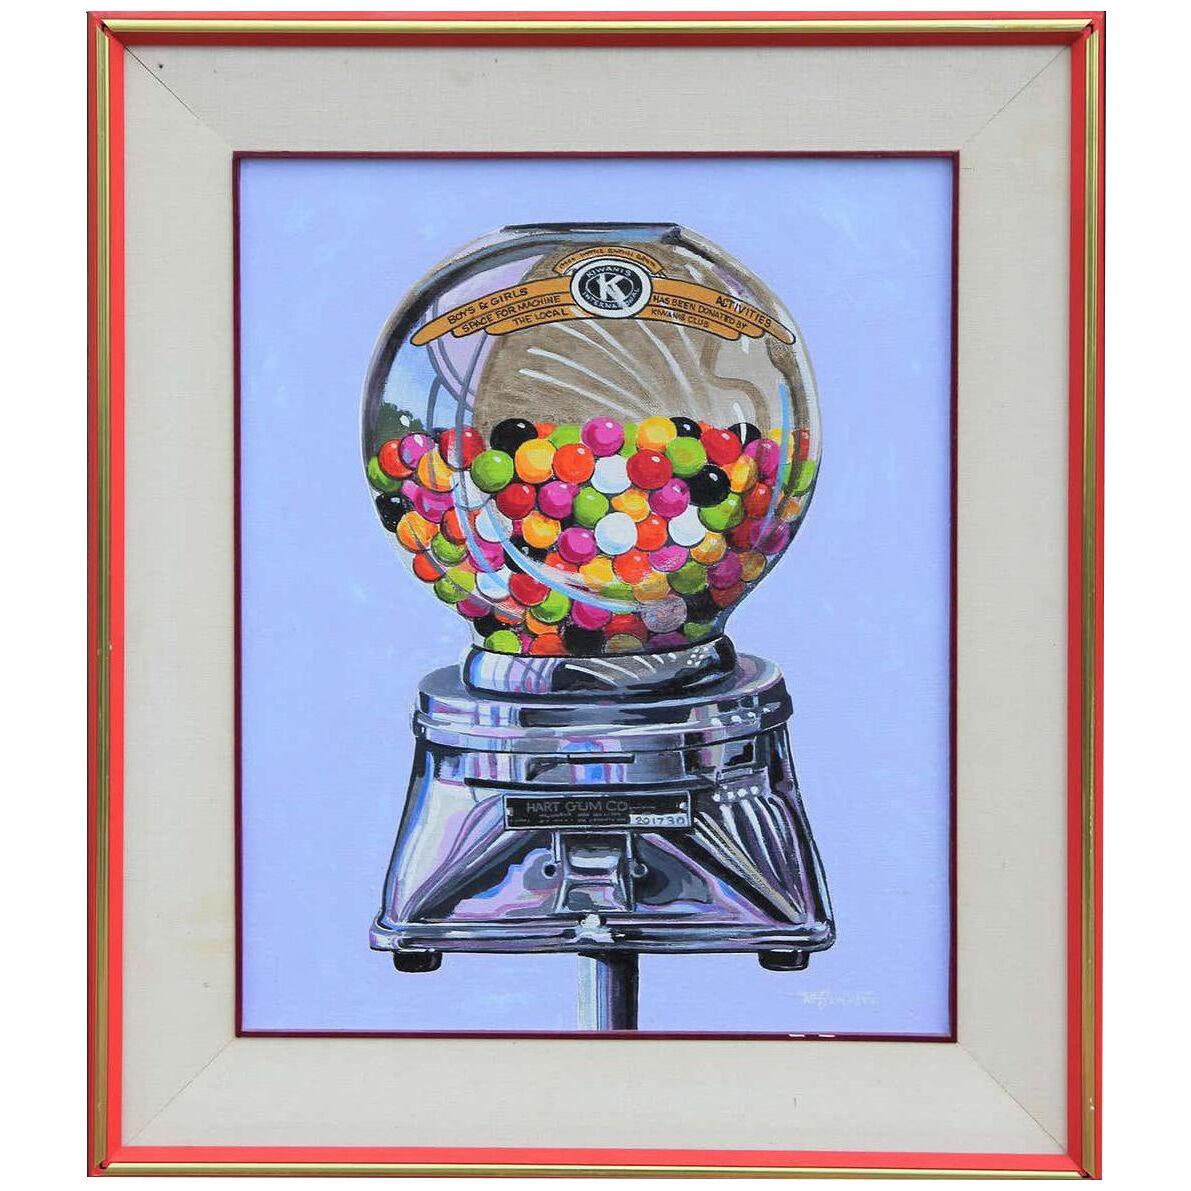 W. R. Stevenson Abstract Vintage Colorful Gumball Candy Machine Painting 1970s